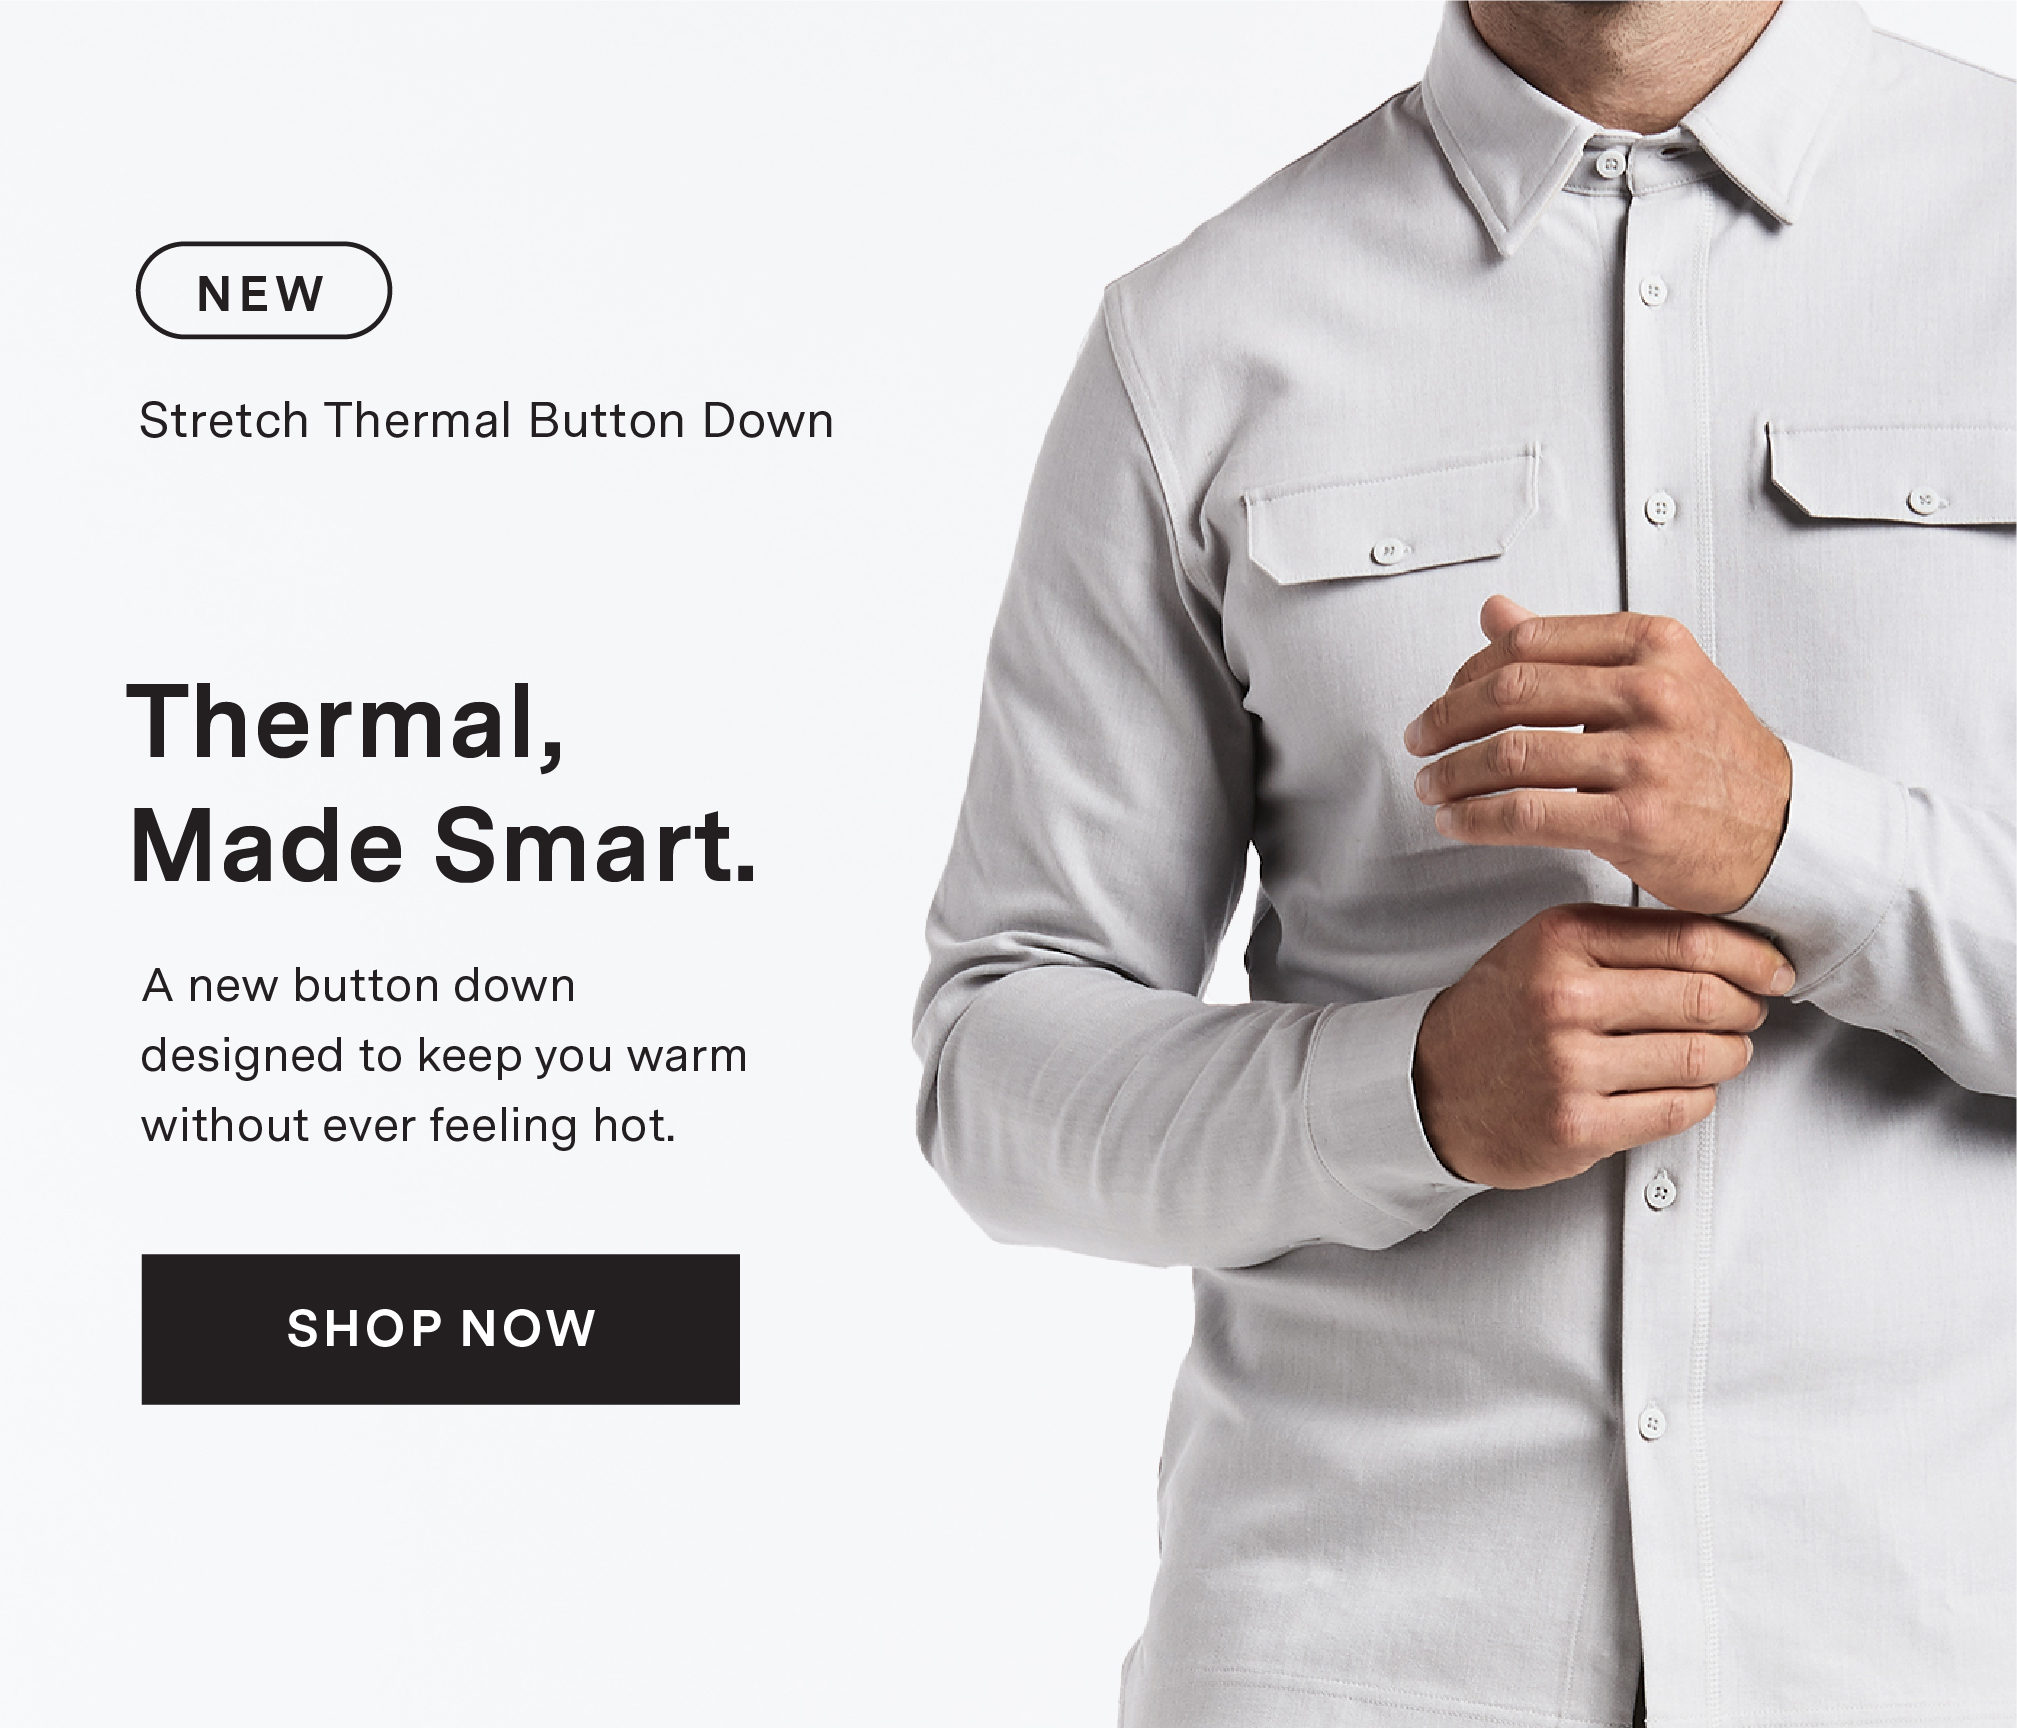 NEW Stretch Thermal Button Down. THERMAL, MADE SMART. A new button down designed to keep you warm without ever feeling hot. SHOP NOW